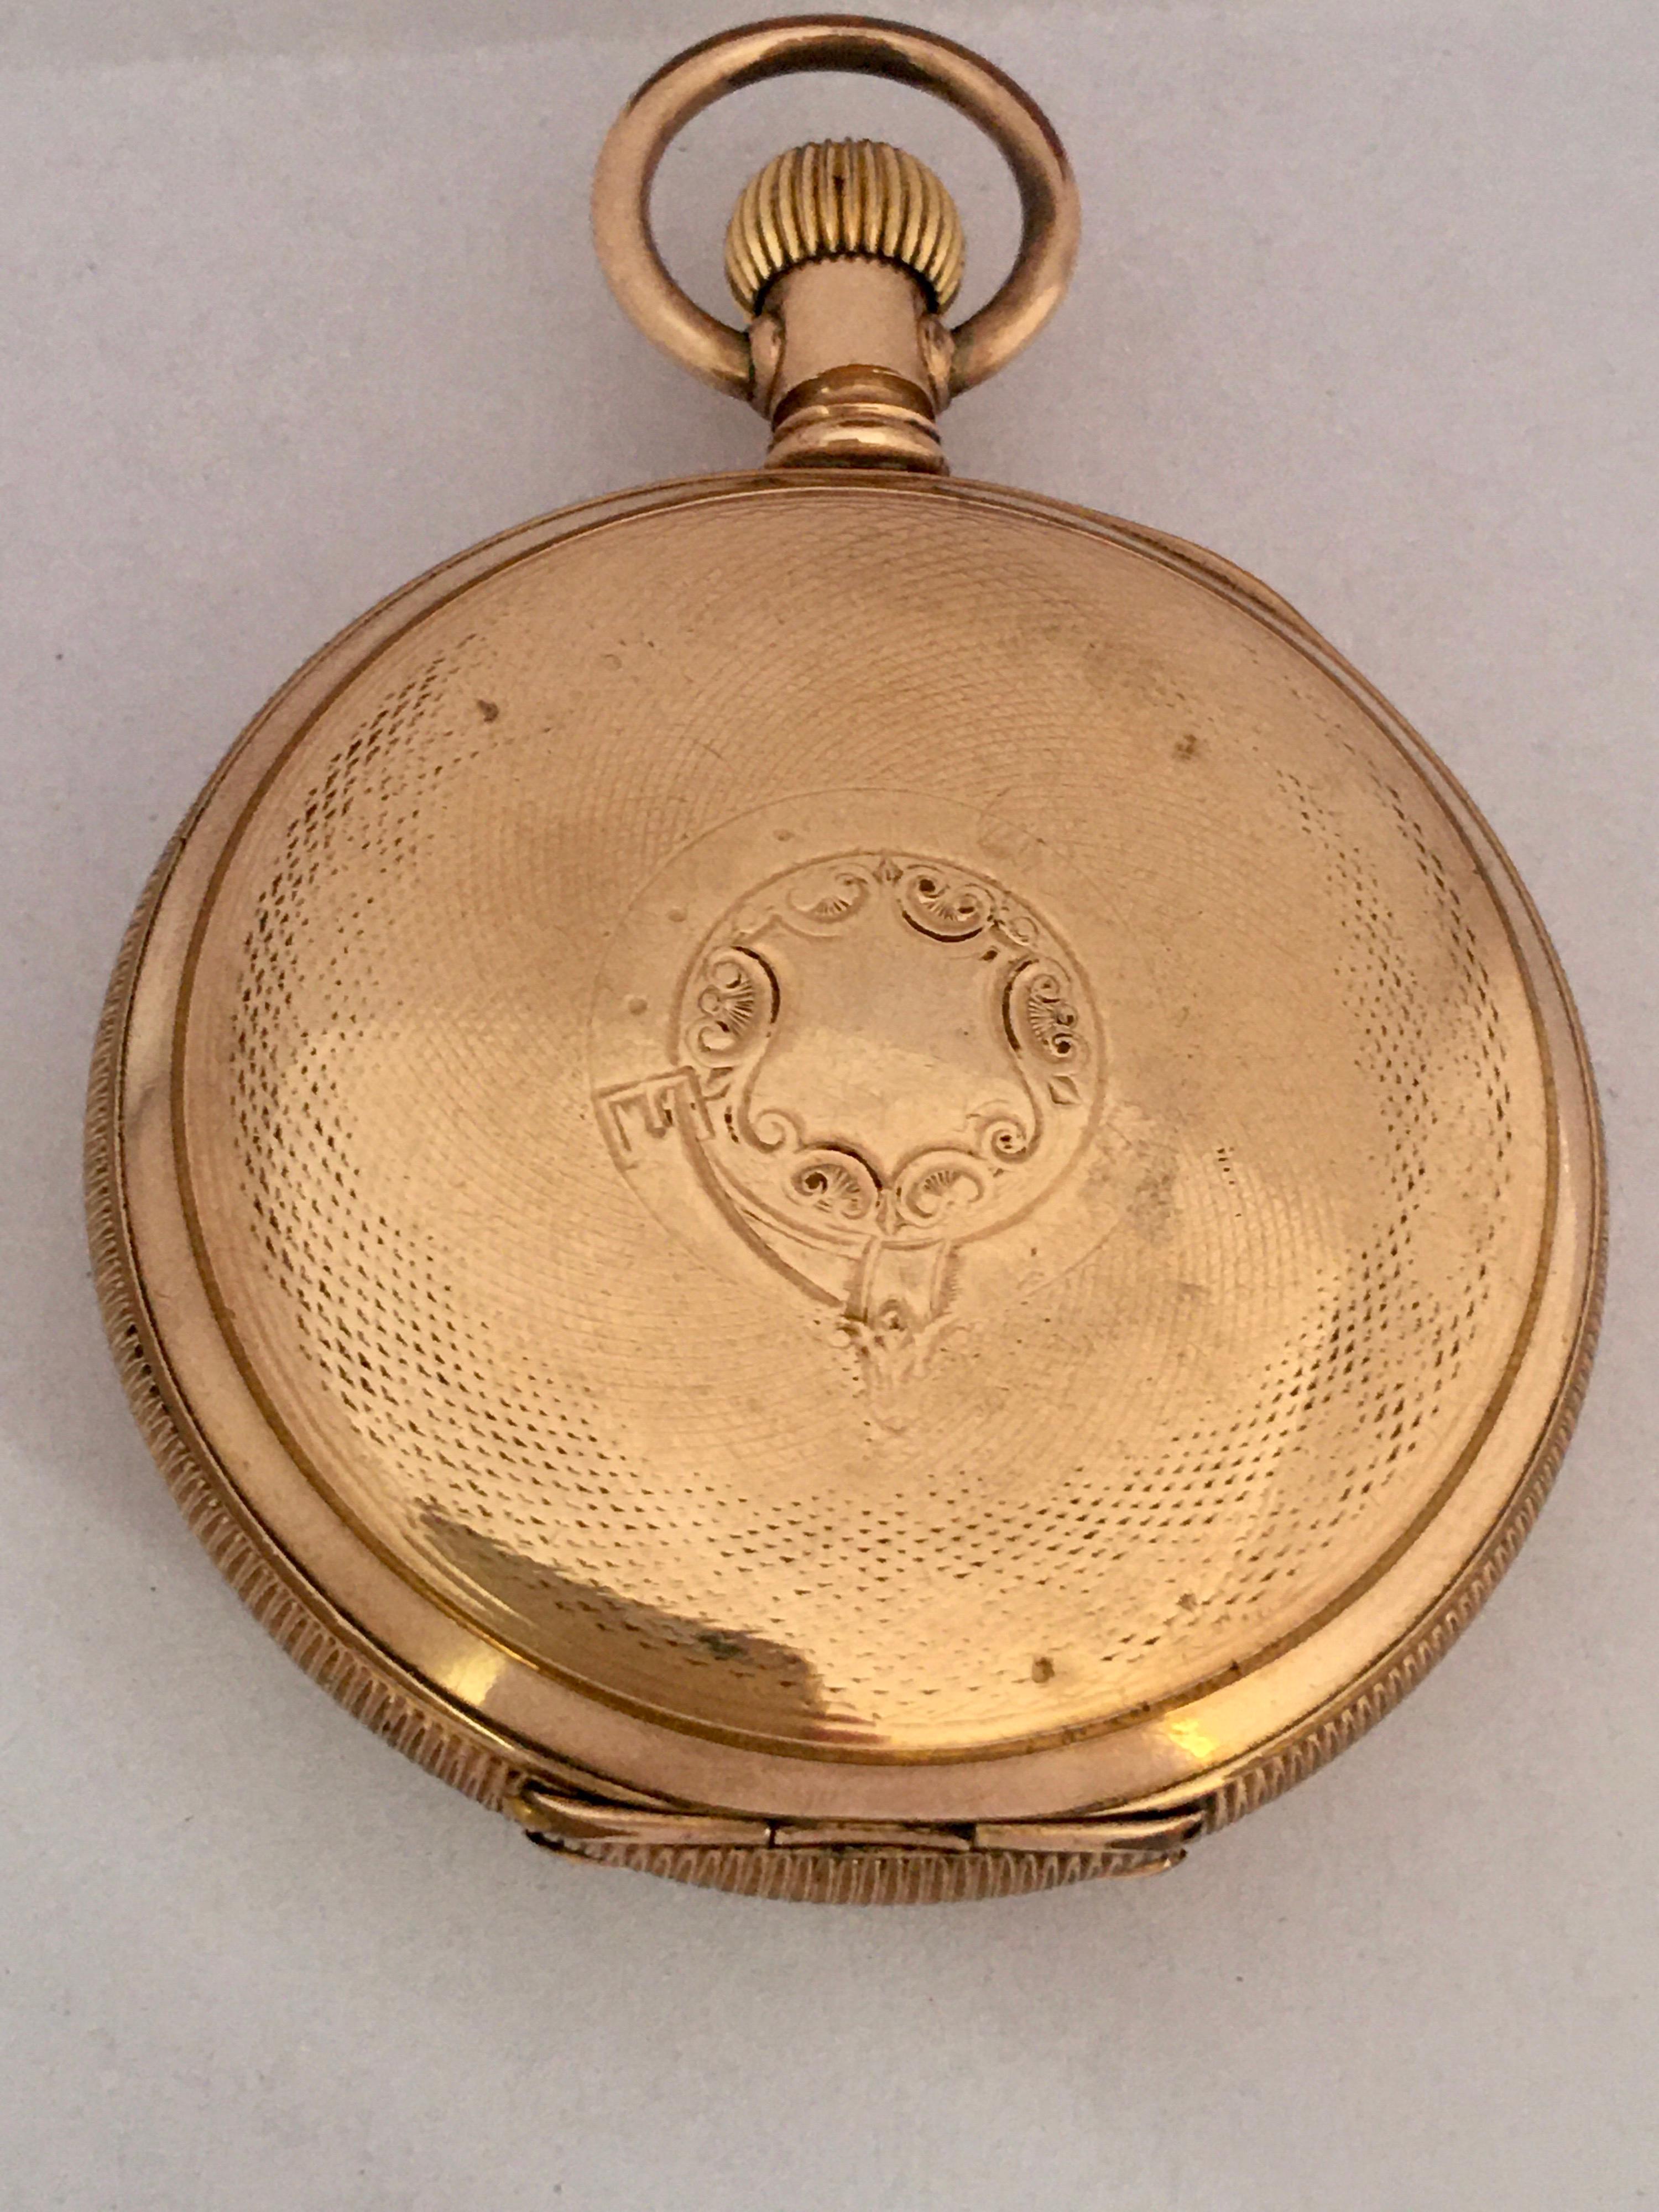 Gold plated lever pocket watch, unsigned gilt frosted movement with compensated balance and regulator, no. 721664, the dial signed E. Stinchcombe, Okehampton, with Roman numerals, minute track and subsidiary seconds, blued steel hands, within an